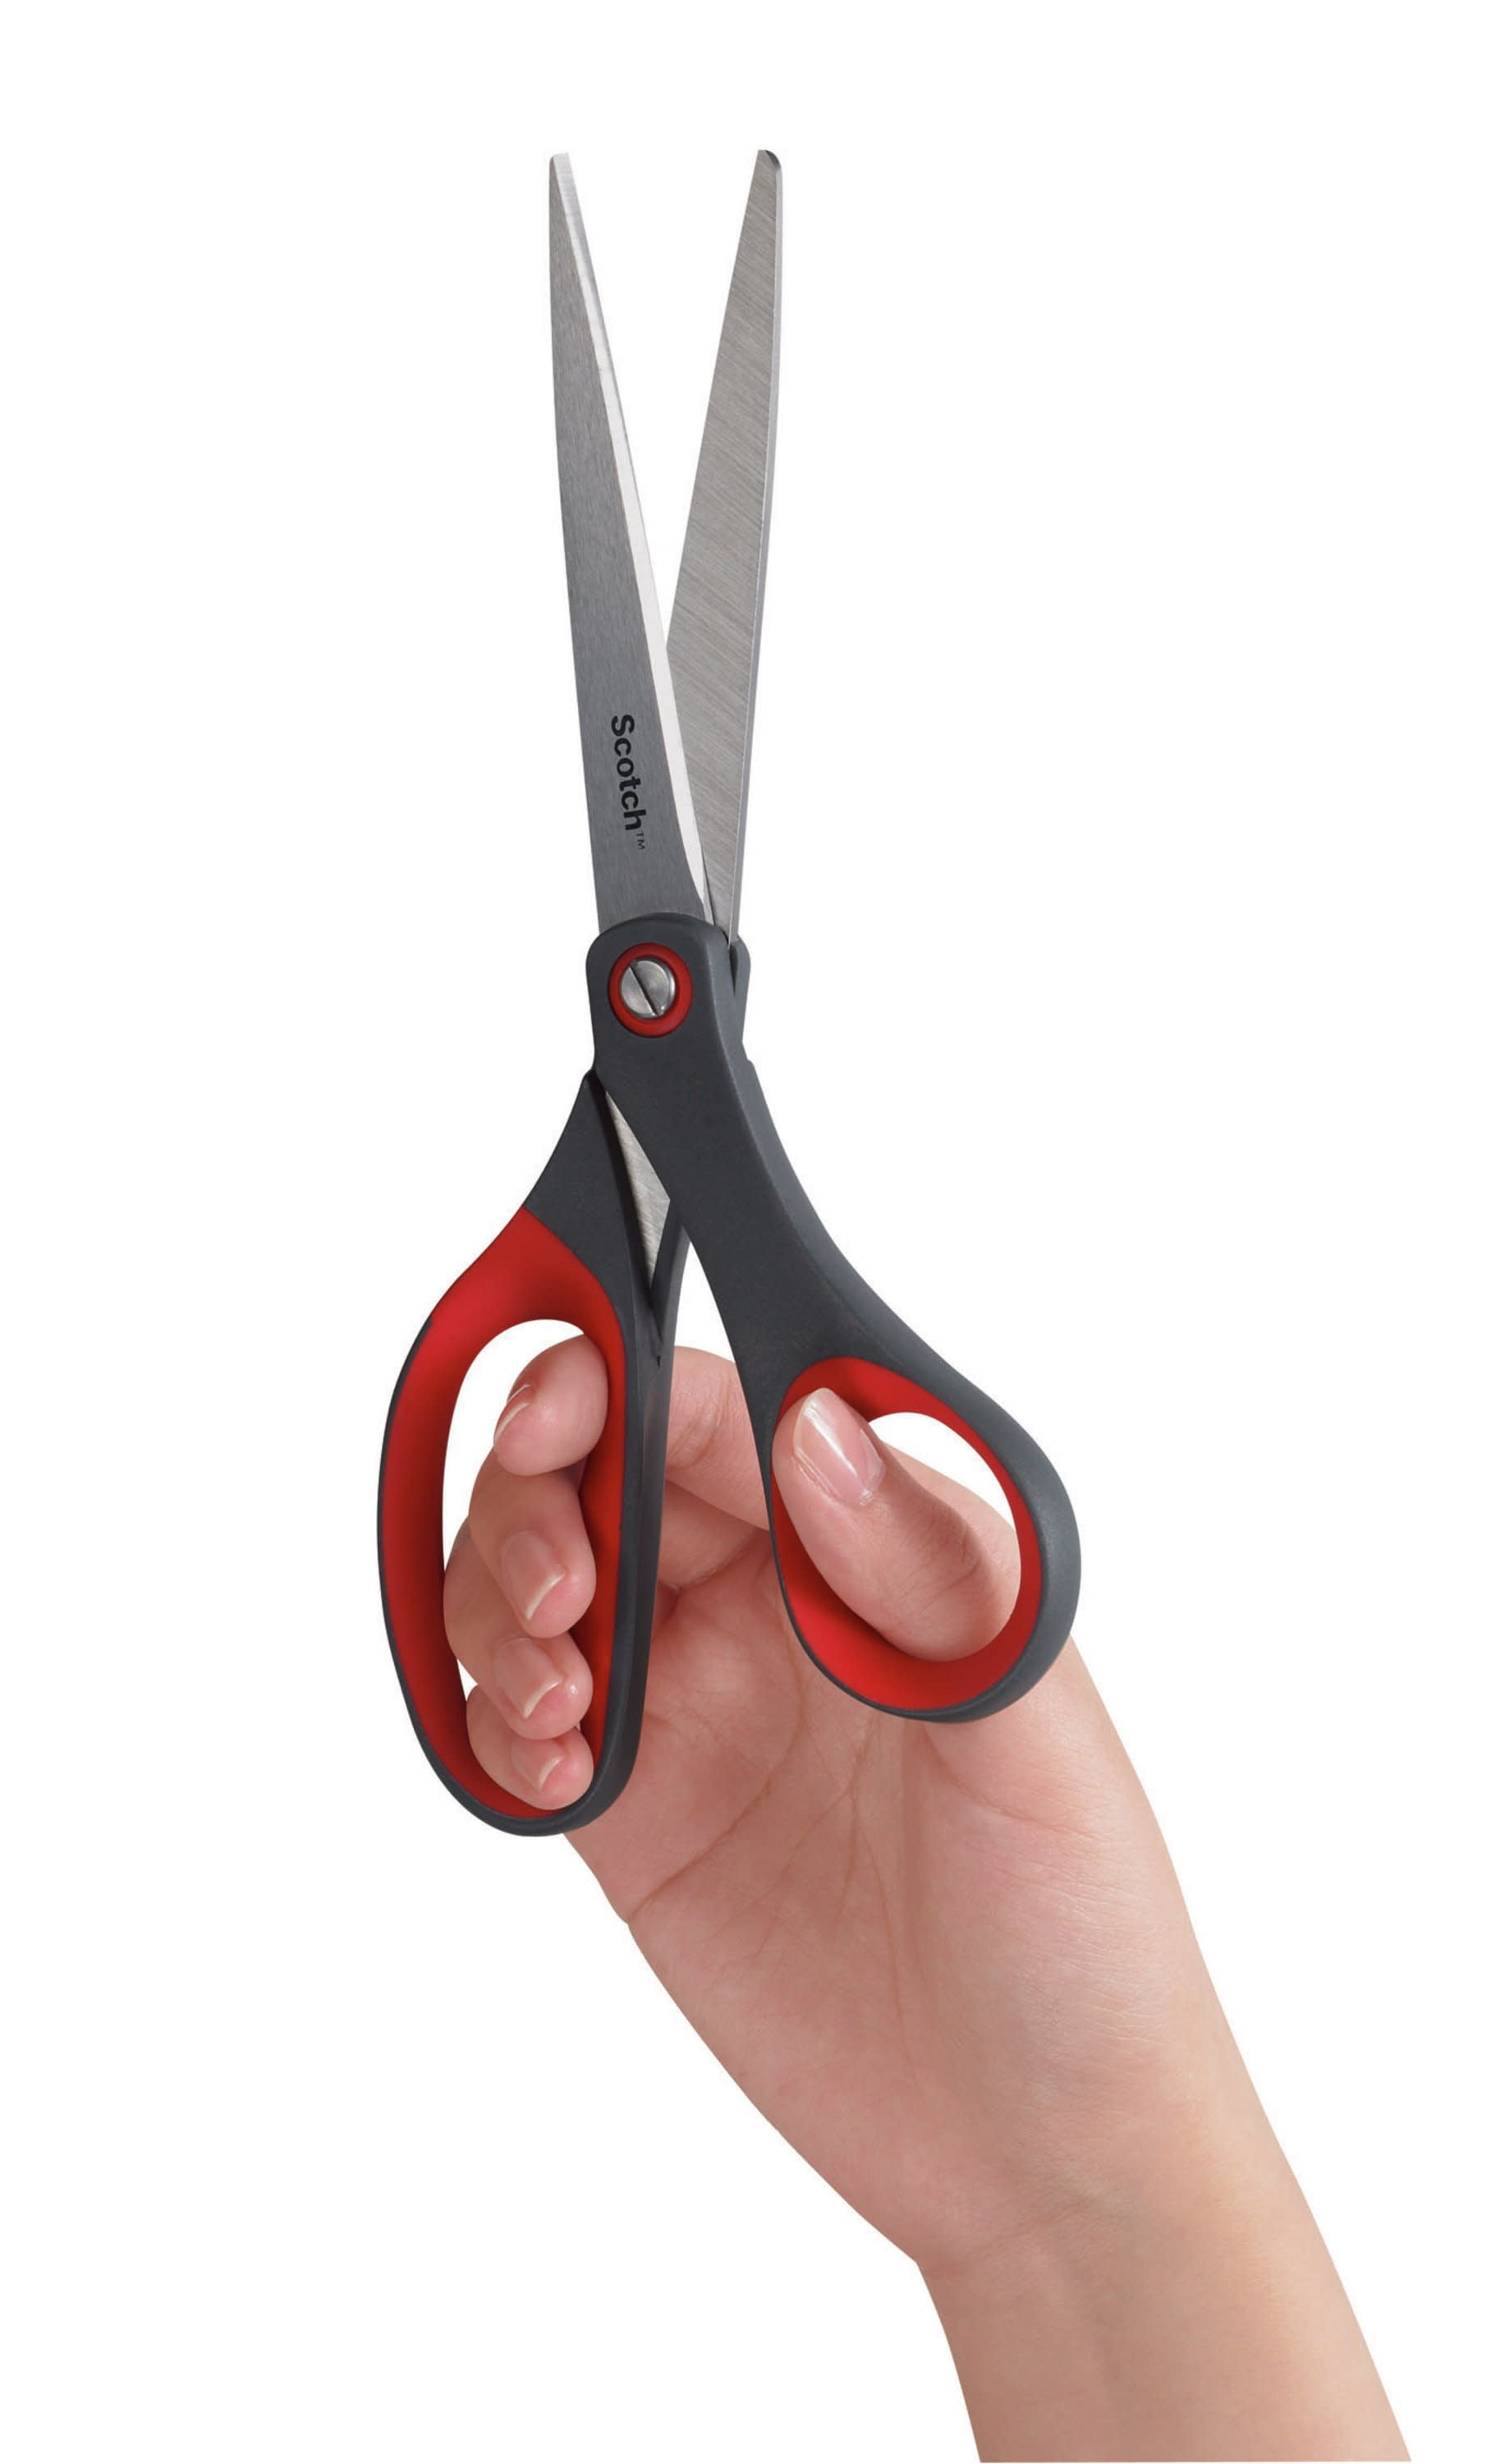 Scotch Professional Precision Scissors, 6 Inches, Stainless Steel Blade,  Assorted Colors